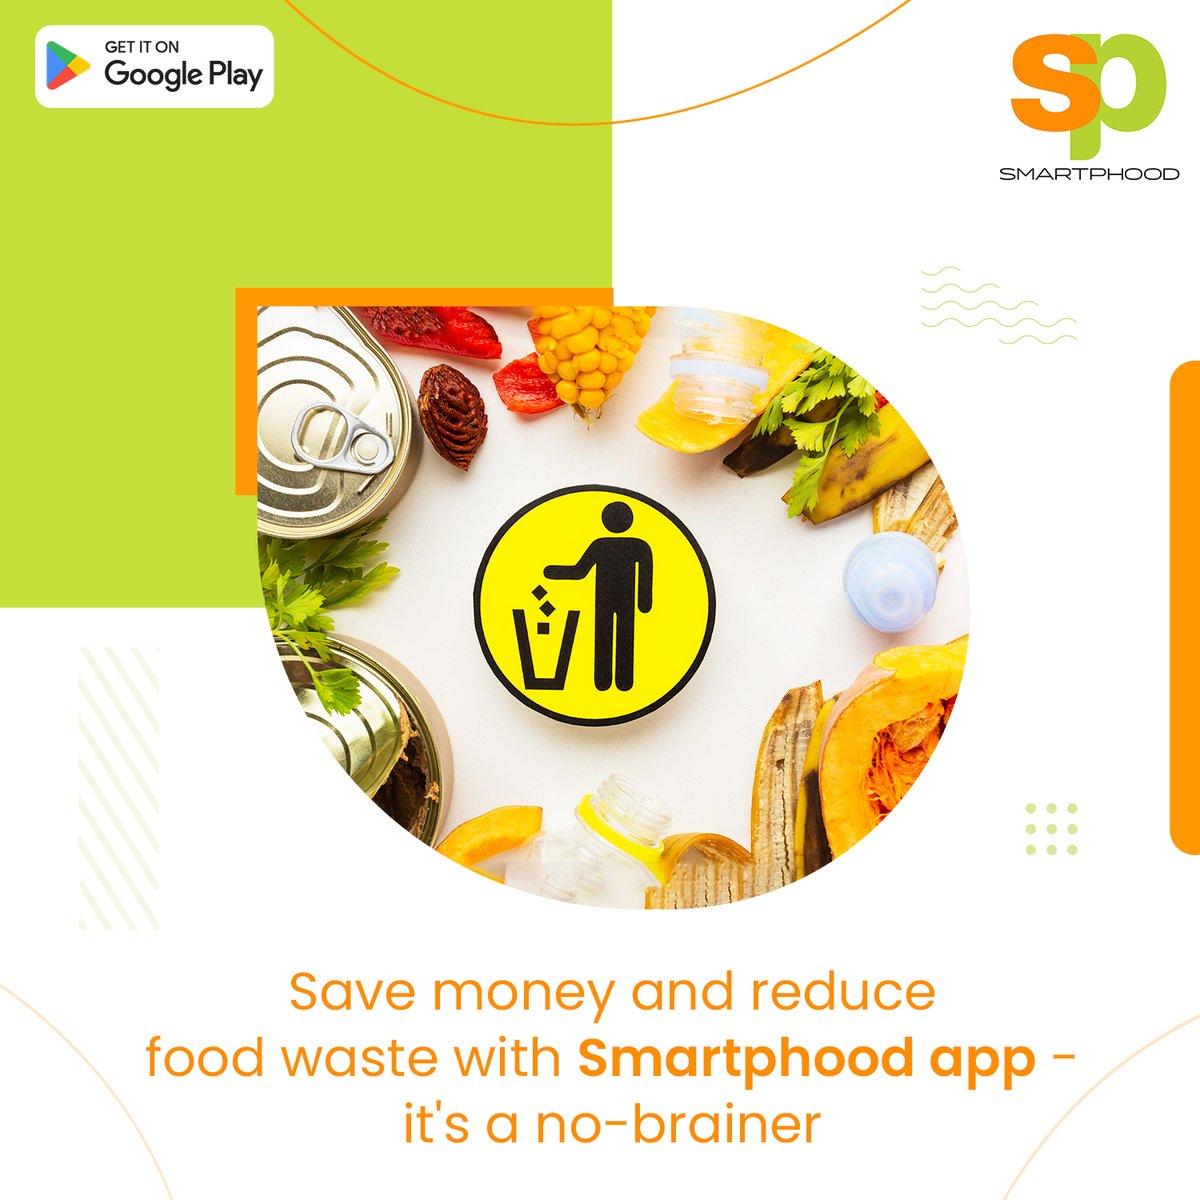 Make every purchase count with the Smartphood app. Start saving and reducing waste!

#smartphoodapp #androidapp #iosapp #savemoney #saveenvironment #foodwastagesaving #reducefoodwaste #financemanagement #takecontrol